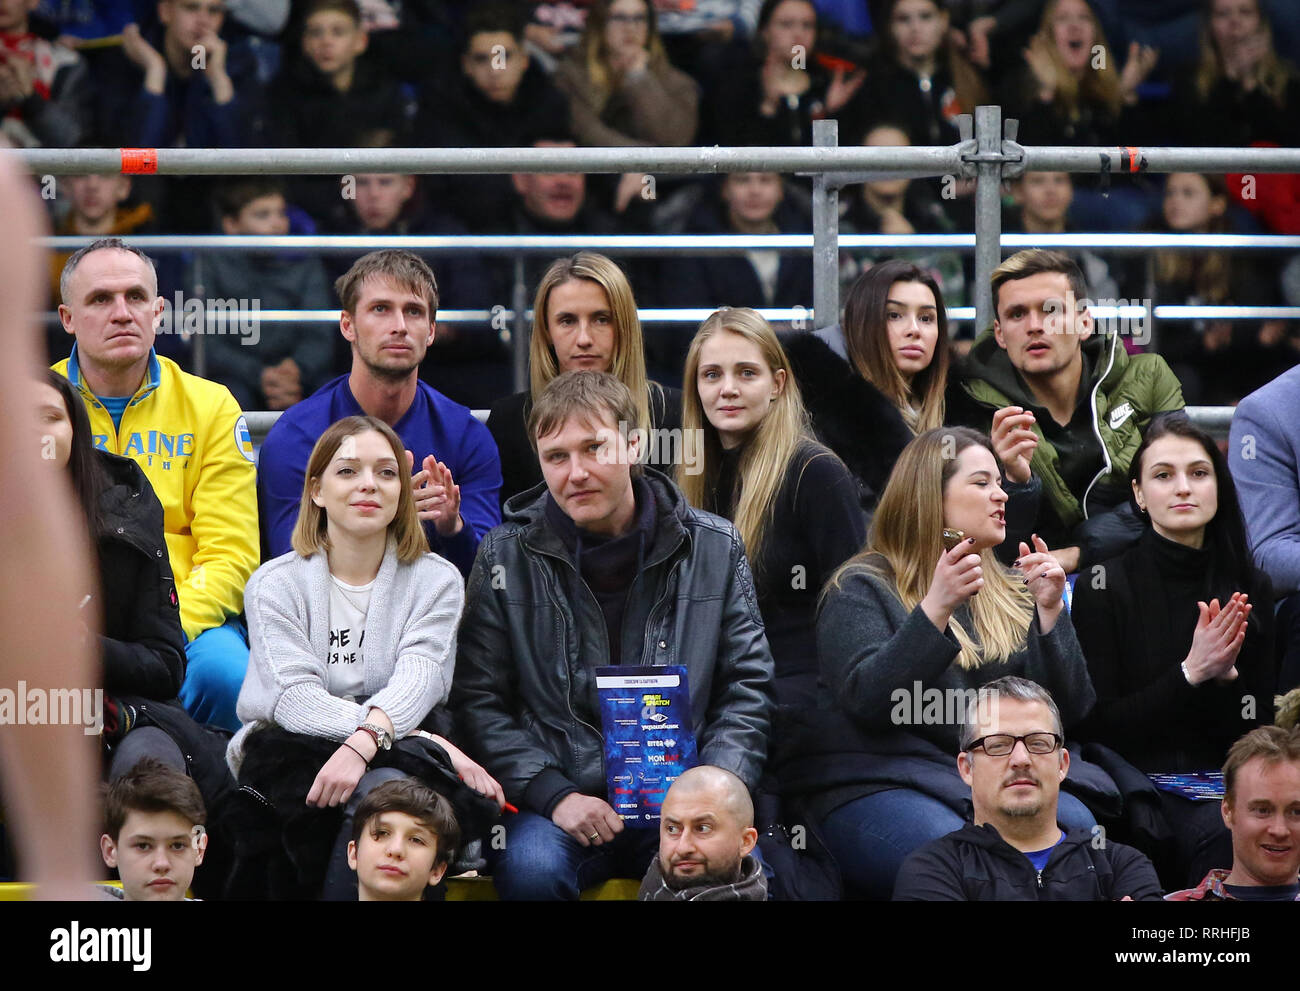 KYIV, UKRAINE - FEBRUARY 22, 2019: Tennis players Lesia Tsurenko and Anna Chakvetadze (3rd and 4th from left in top row) watch the FIBA World Cup 2019 Stock Photo